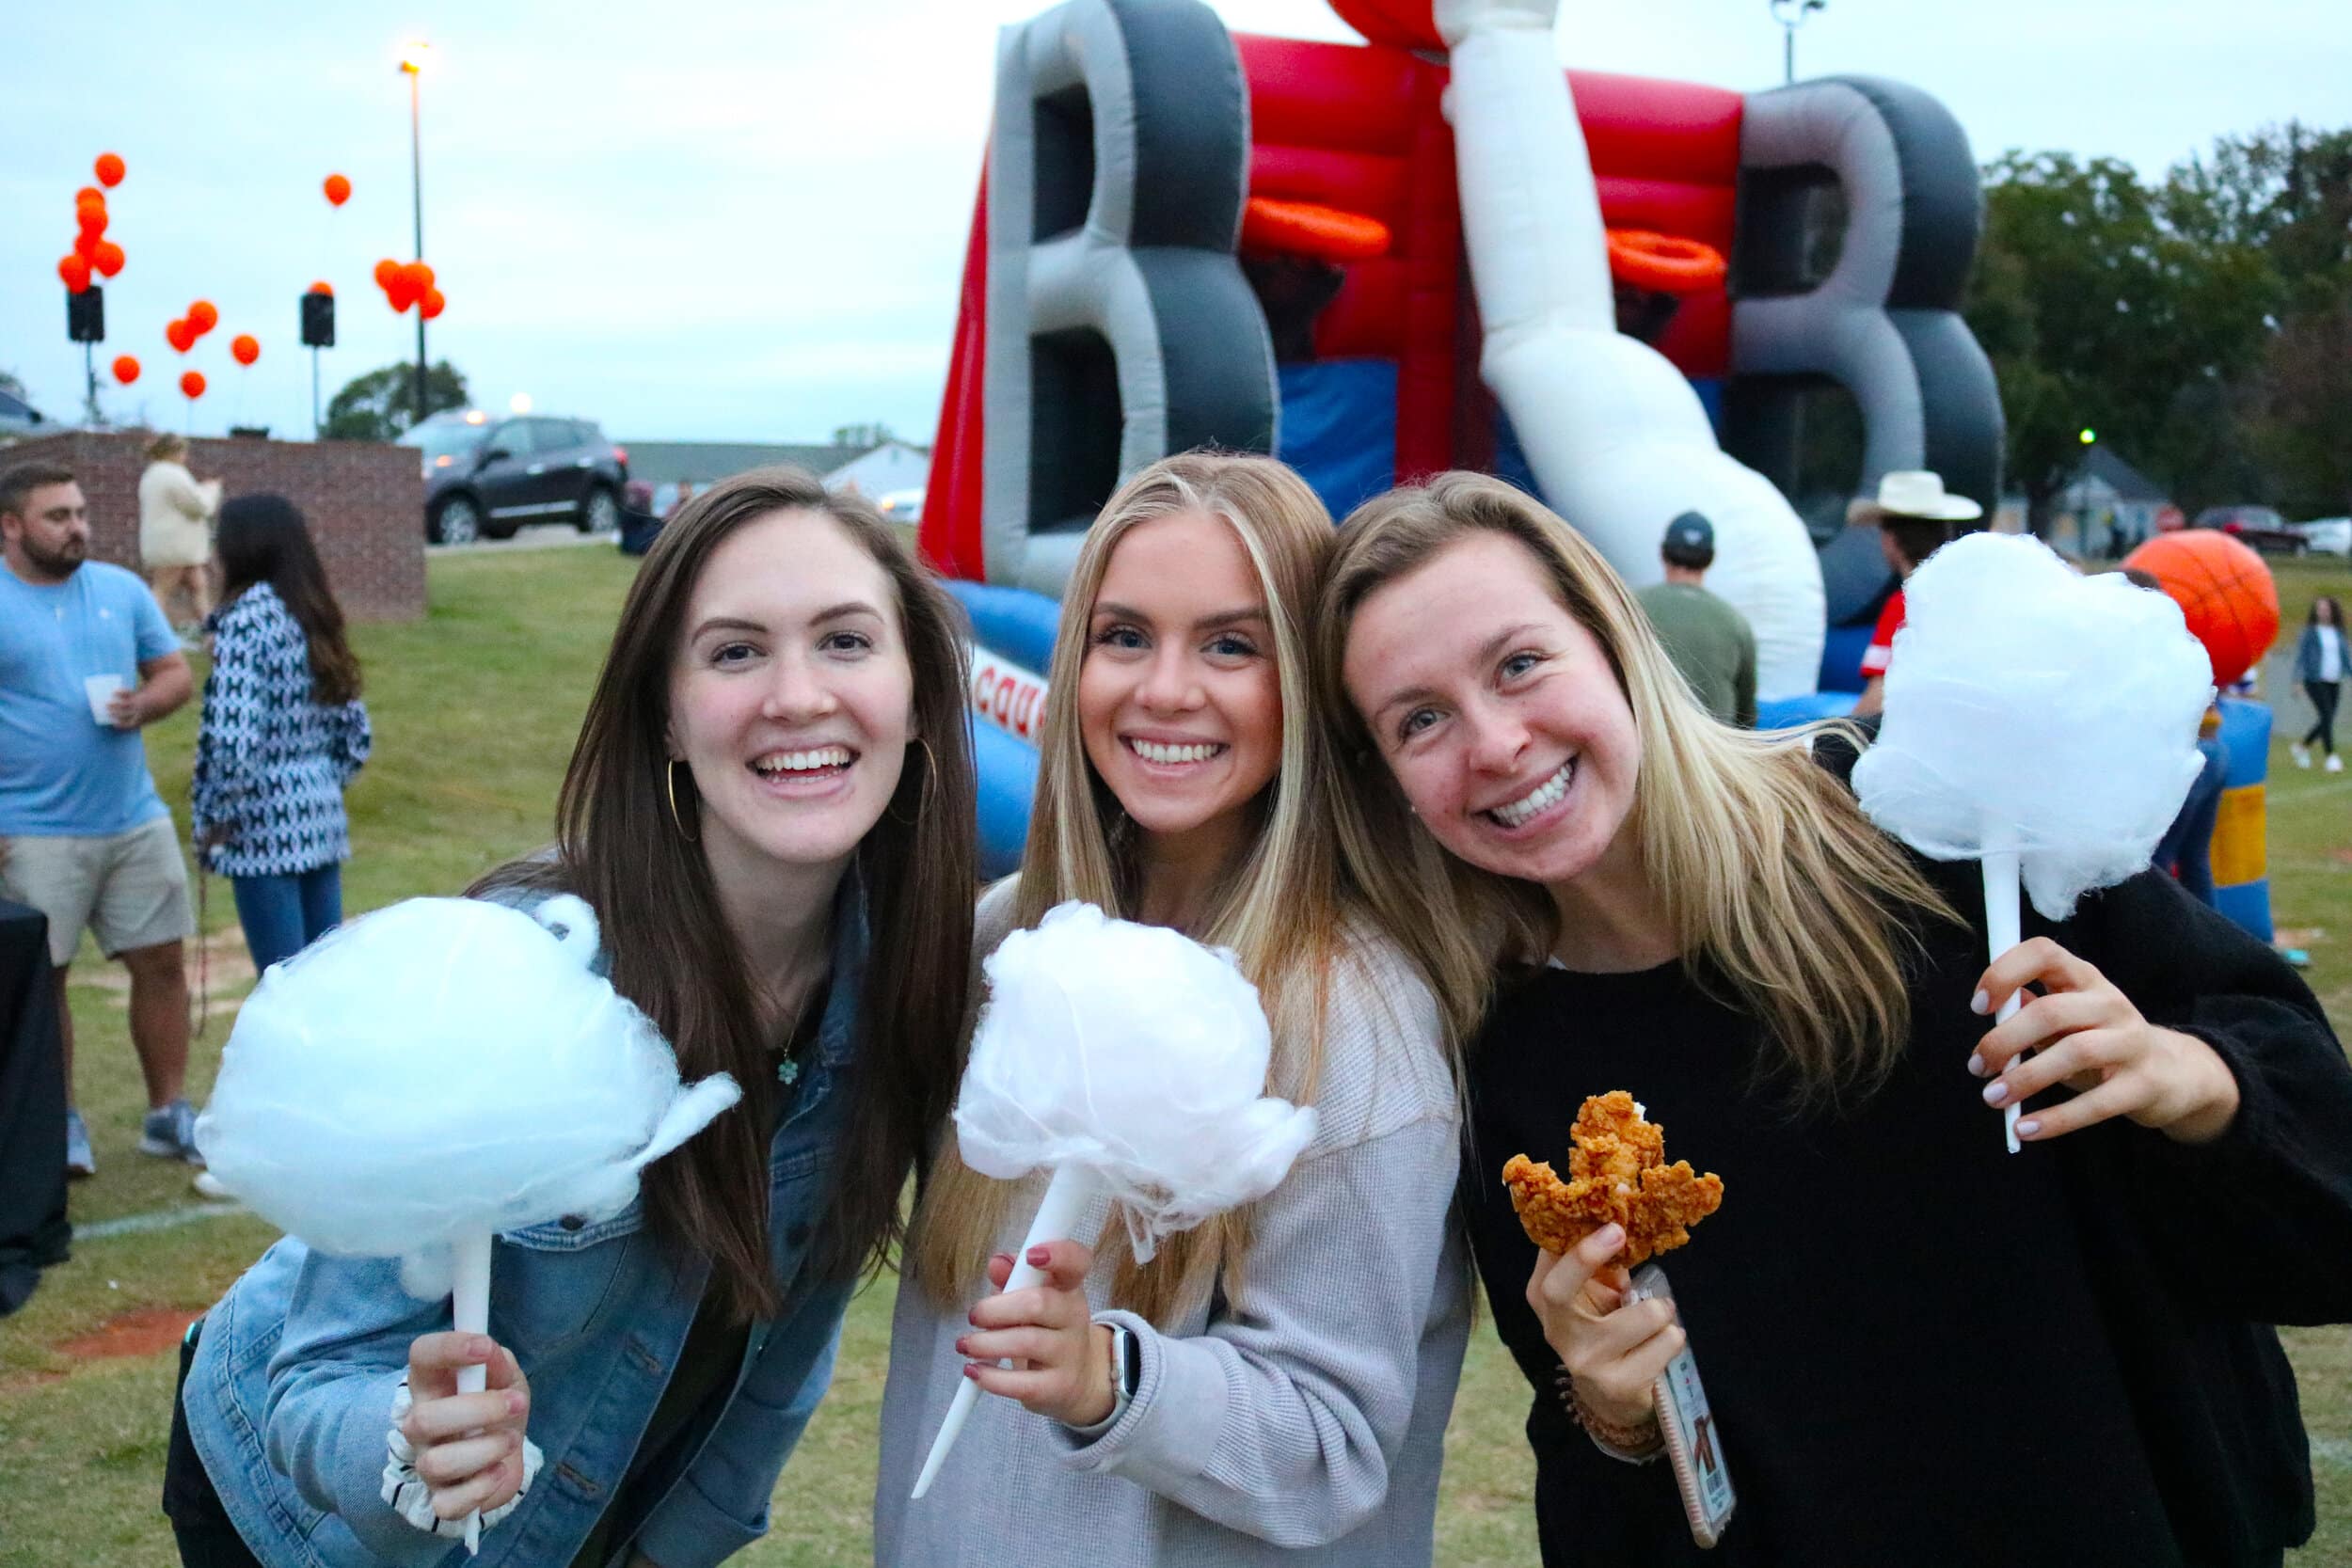 Senior Kailyn Horn and sophomores Rachel Stanley and Abby McCall get some free cotton candy (and chicken fingers) before hitting the fair.